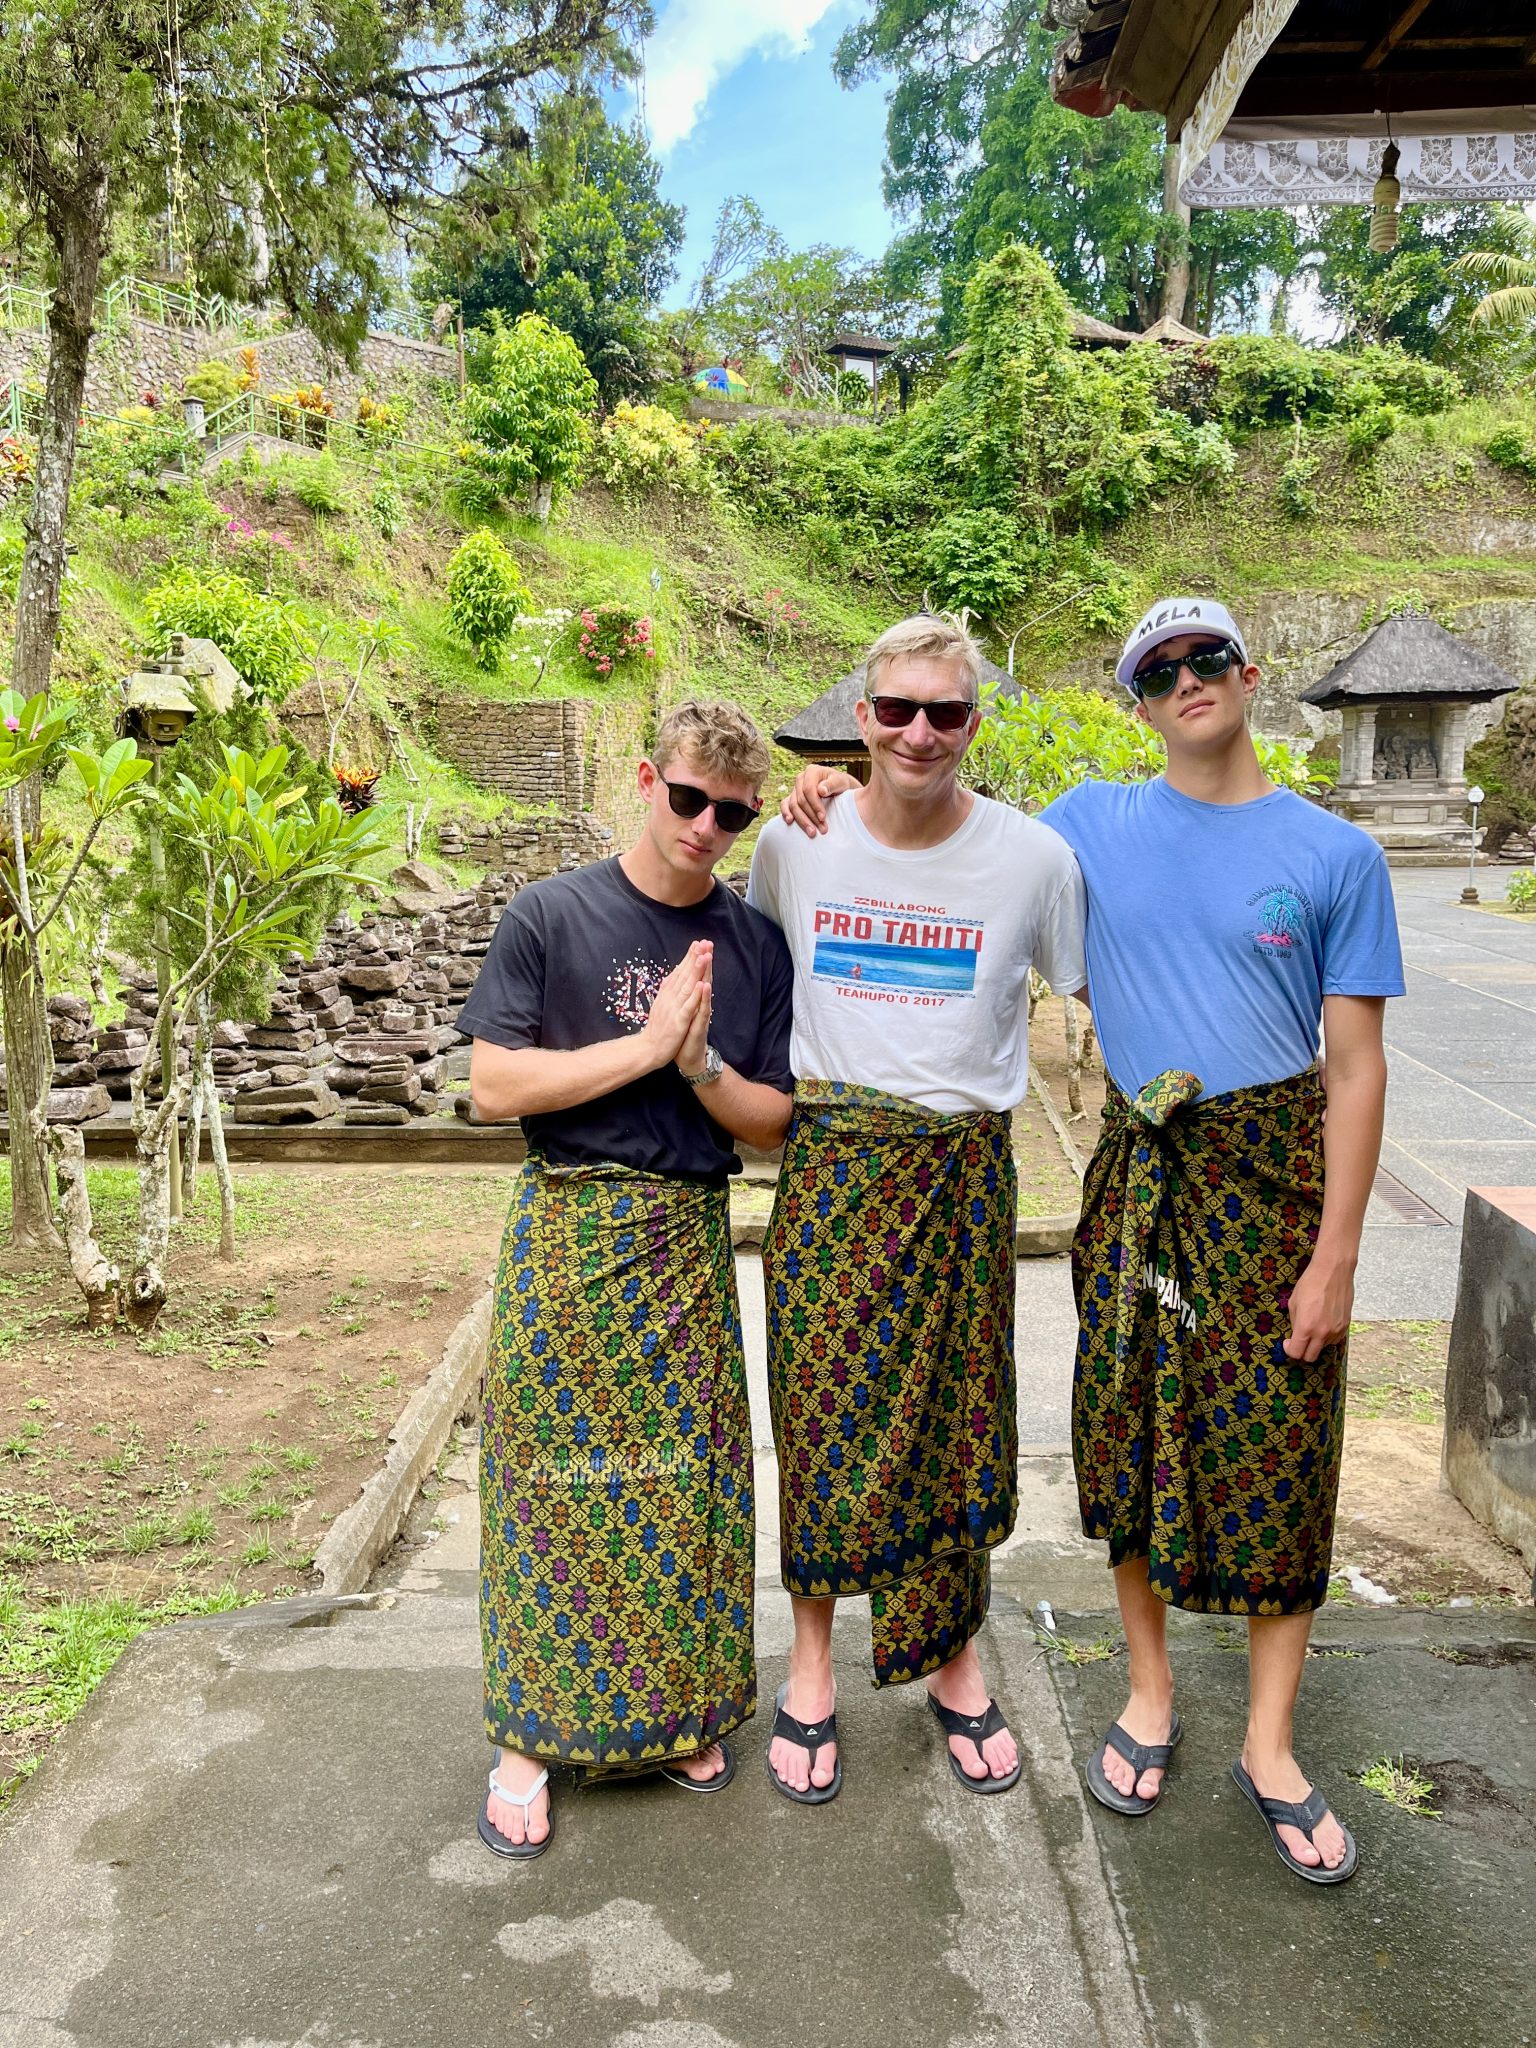 why you need to wear sarongs when visiting temples in Bali